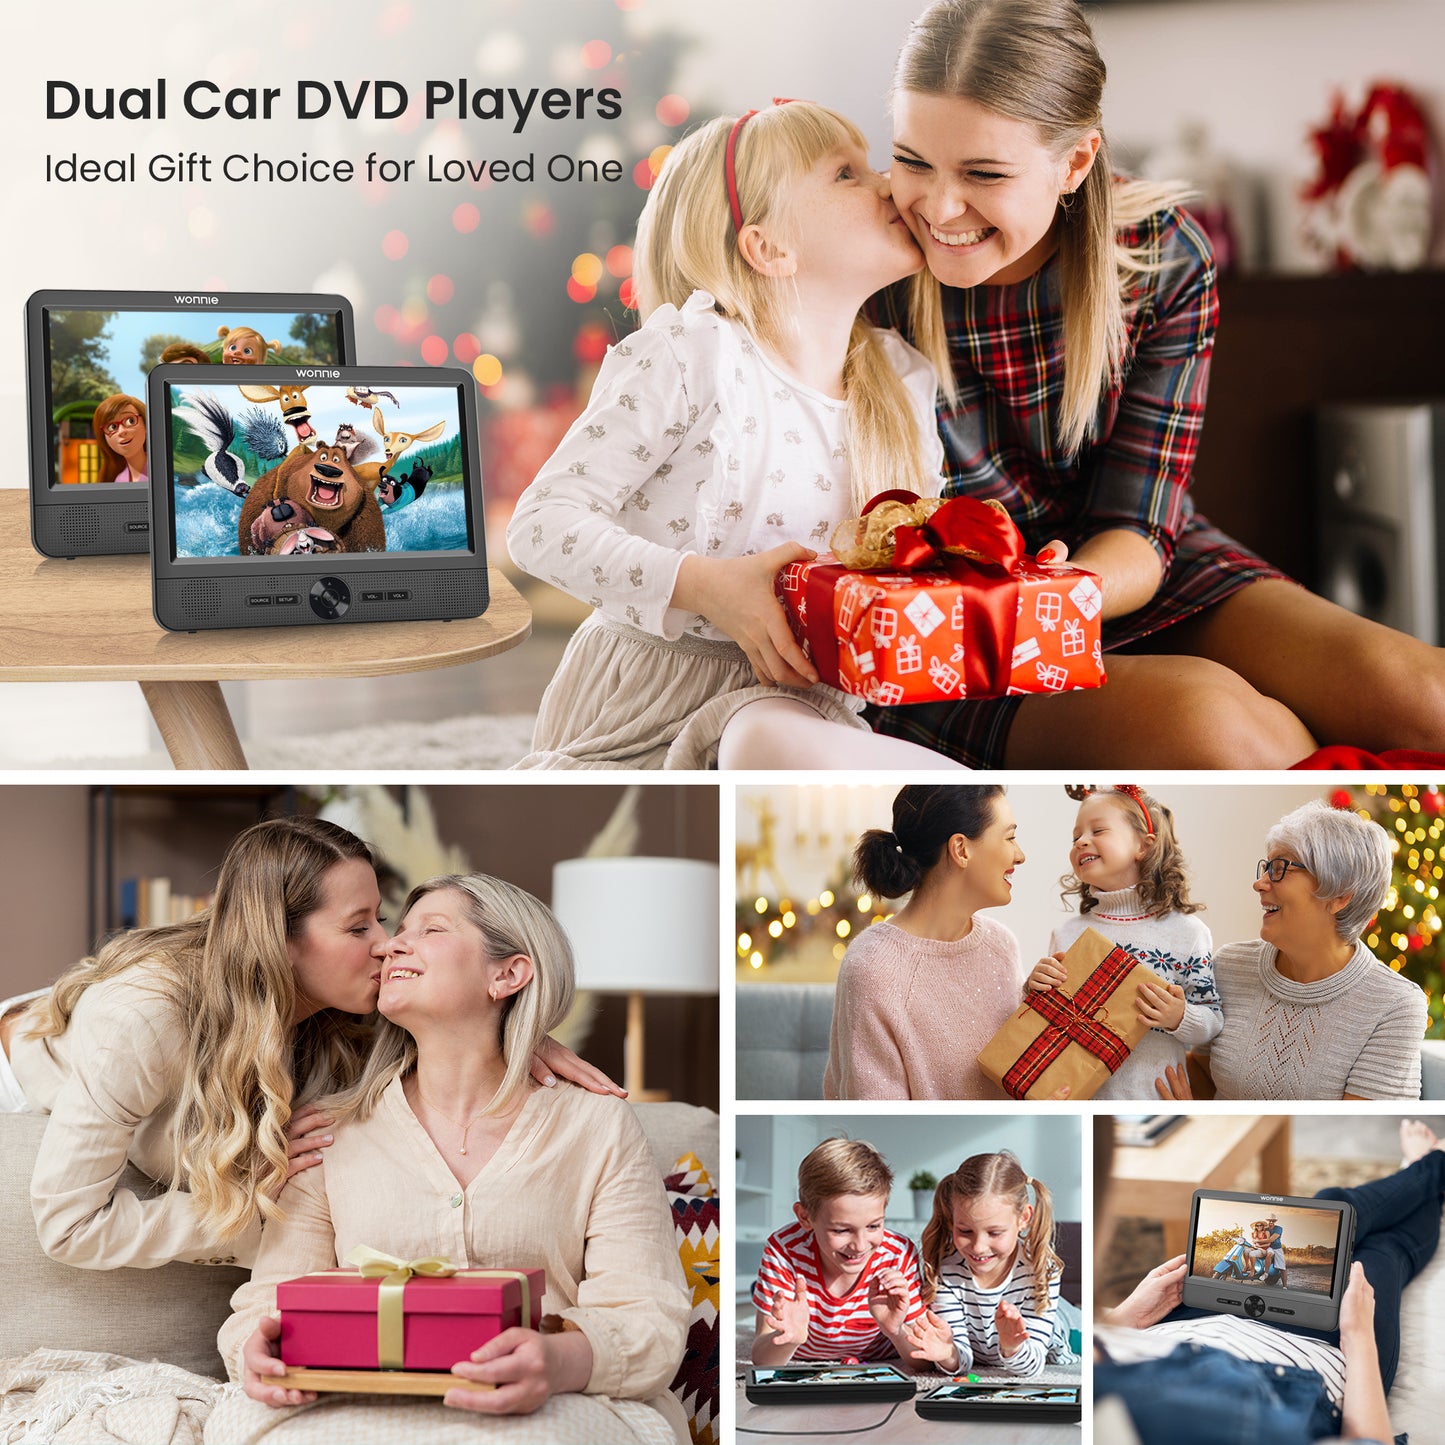 WONNIE 10” Portable Dual Screen DVD Players, Two Car DVD Player with Built-In Rechargeable Battery, Headrest DVD CD Player Support USB/ TF Card, AV In & Out, Best Gift Choice for Kids & Parents